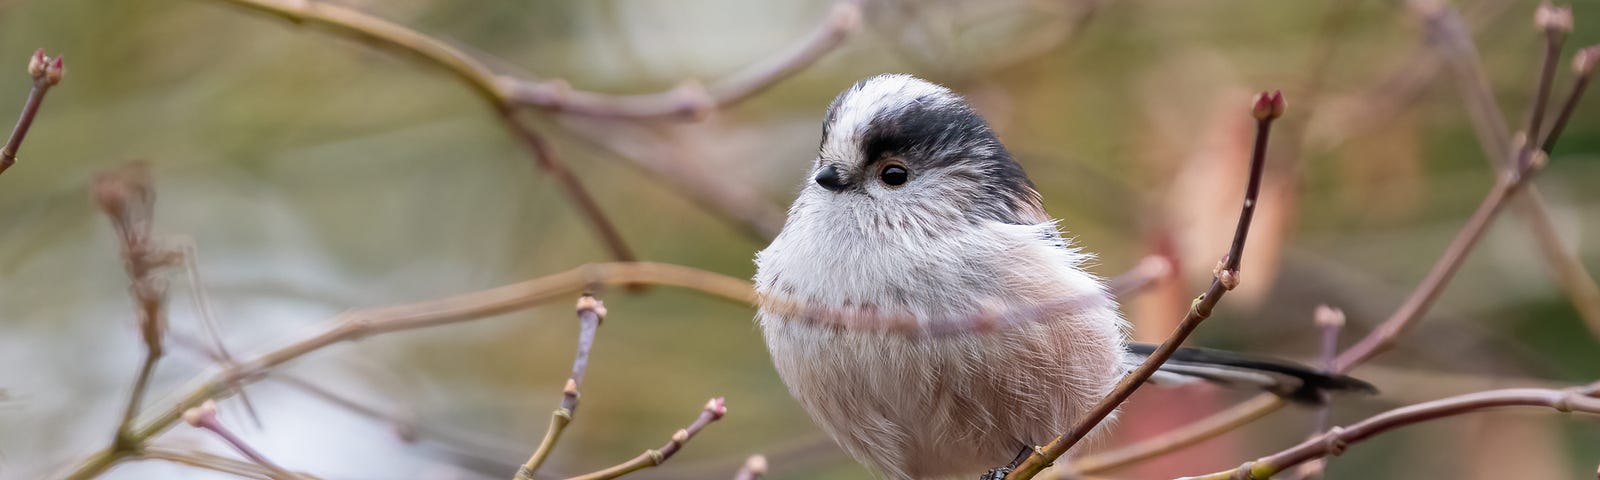 long-tailed tit side-on view perched on branch